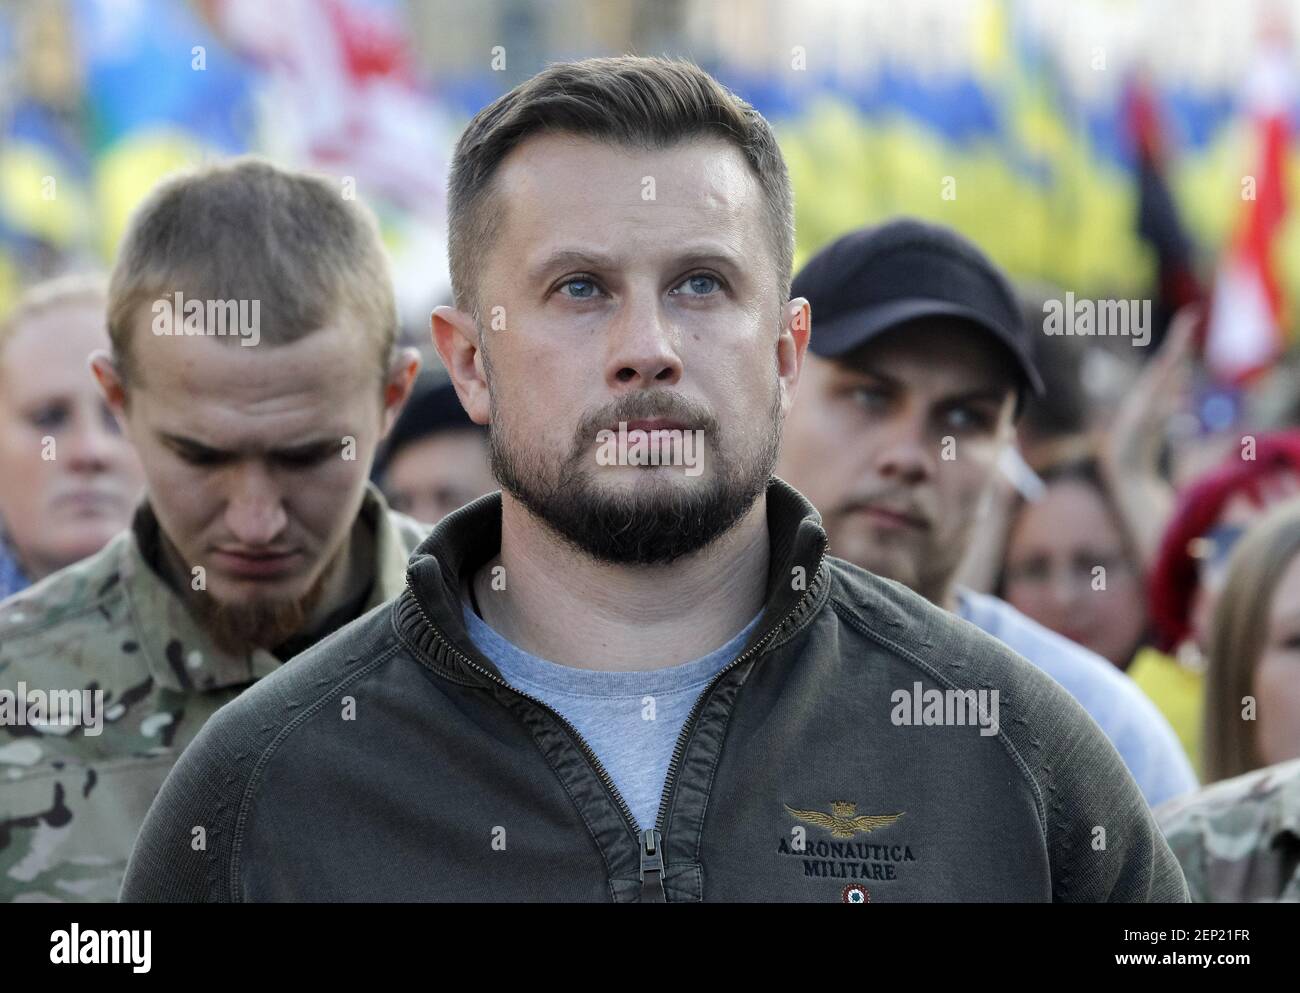 andriy-biletsky-head-of-national-corps-party-during-the-march-commemorating-the-77th-anniversary-of-the-founding-of-the-upa-the-ukrainian-insurgent-army-upa-active-fought-for-ukrainian-independence-from-1942-to-1949-mostly-in-western-ukraine-against-the-german-nazi-and-soviet-regimes-ukrainians-also-mark-the-defender-of-ukraine-day-on-the-same-date-photo-by-pavlo-gonchar-sopa-imagessipa-usa-2EP21FR.jpg